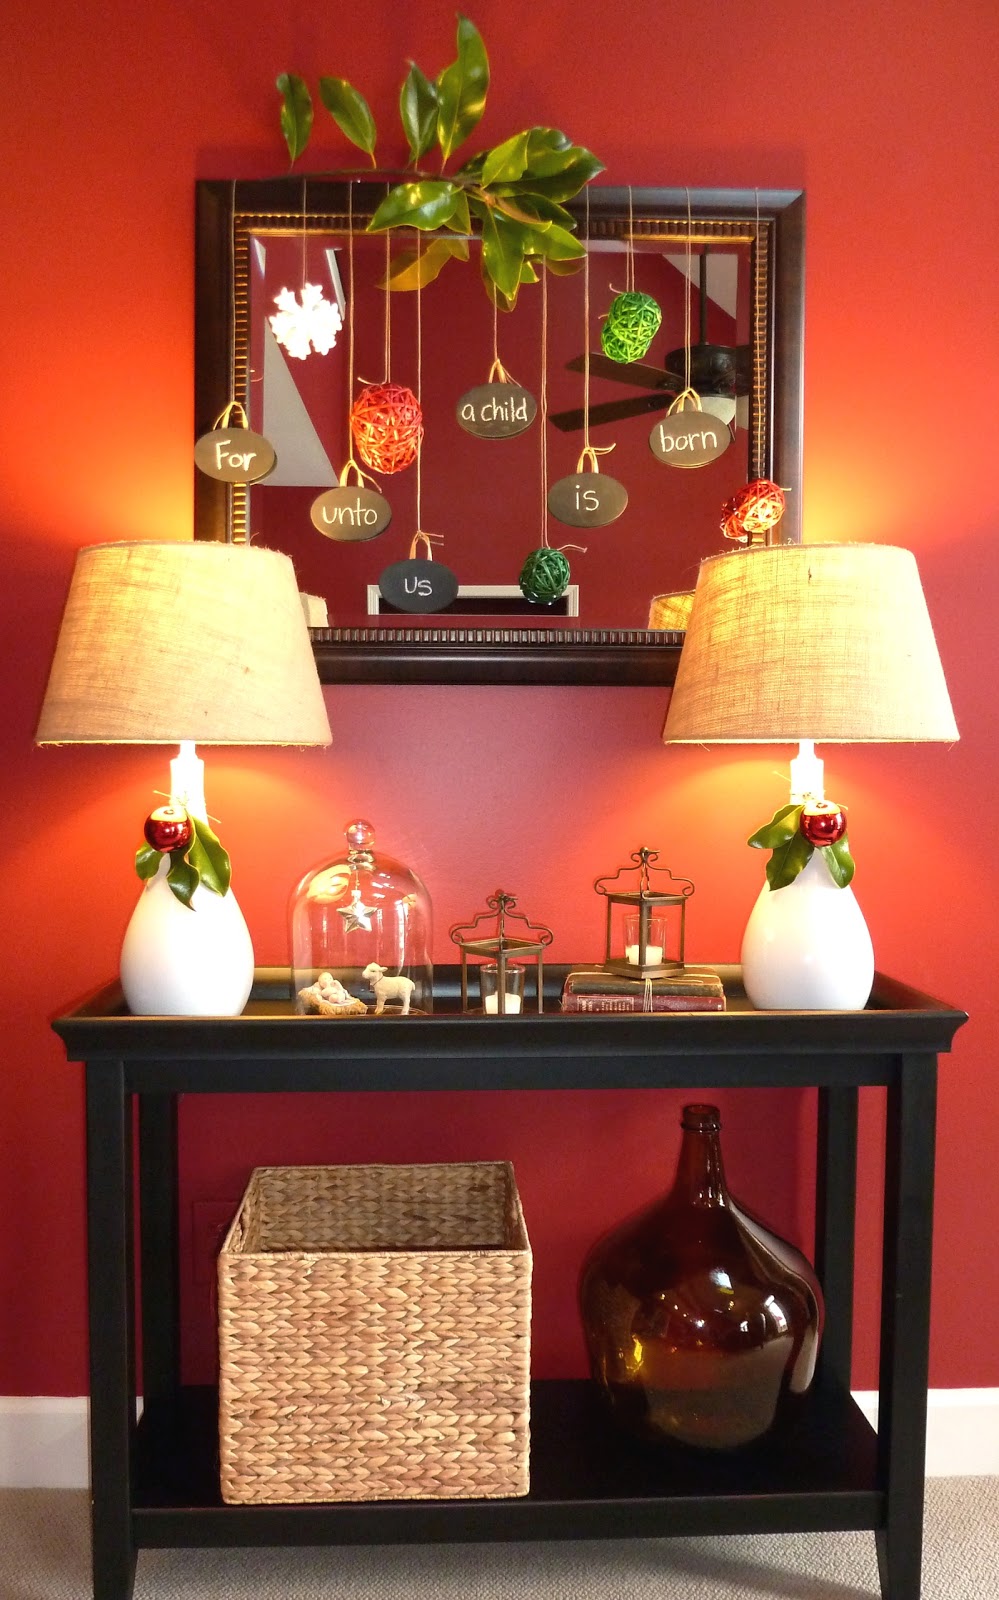 Our Fifth House: A Simple Christmas Vignette